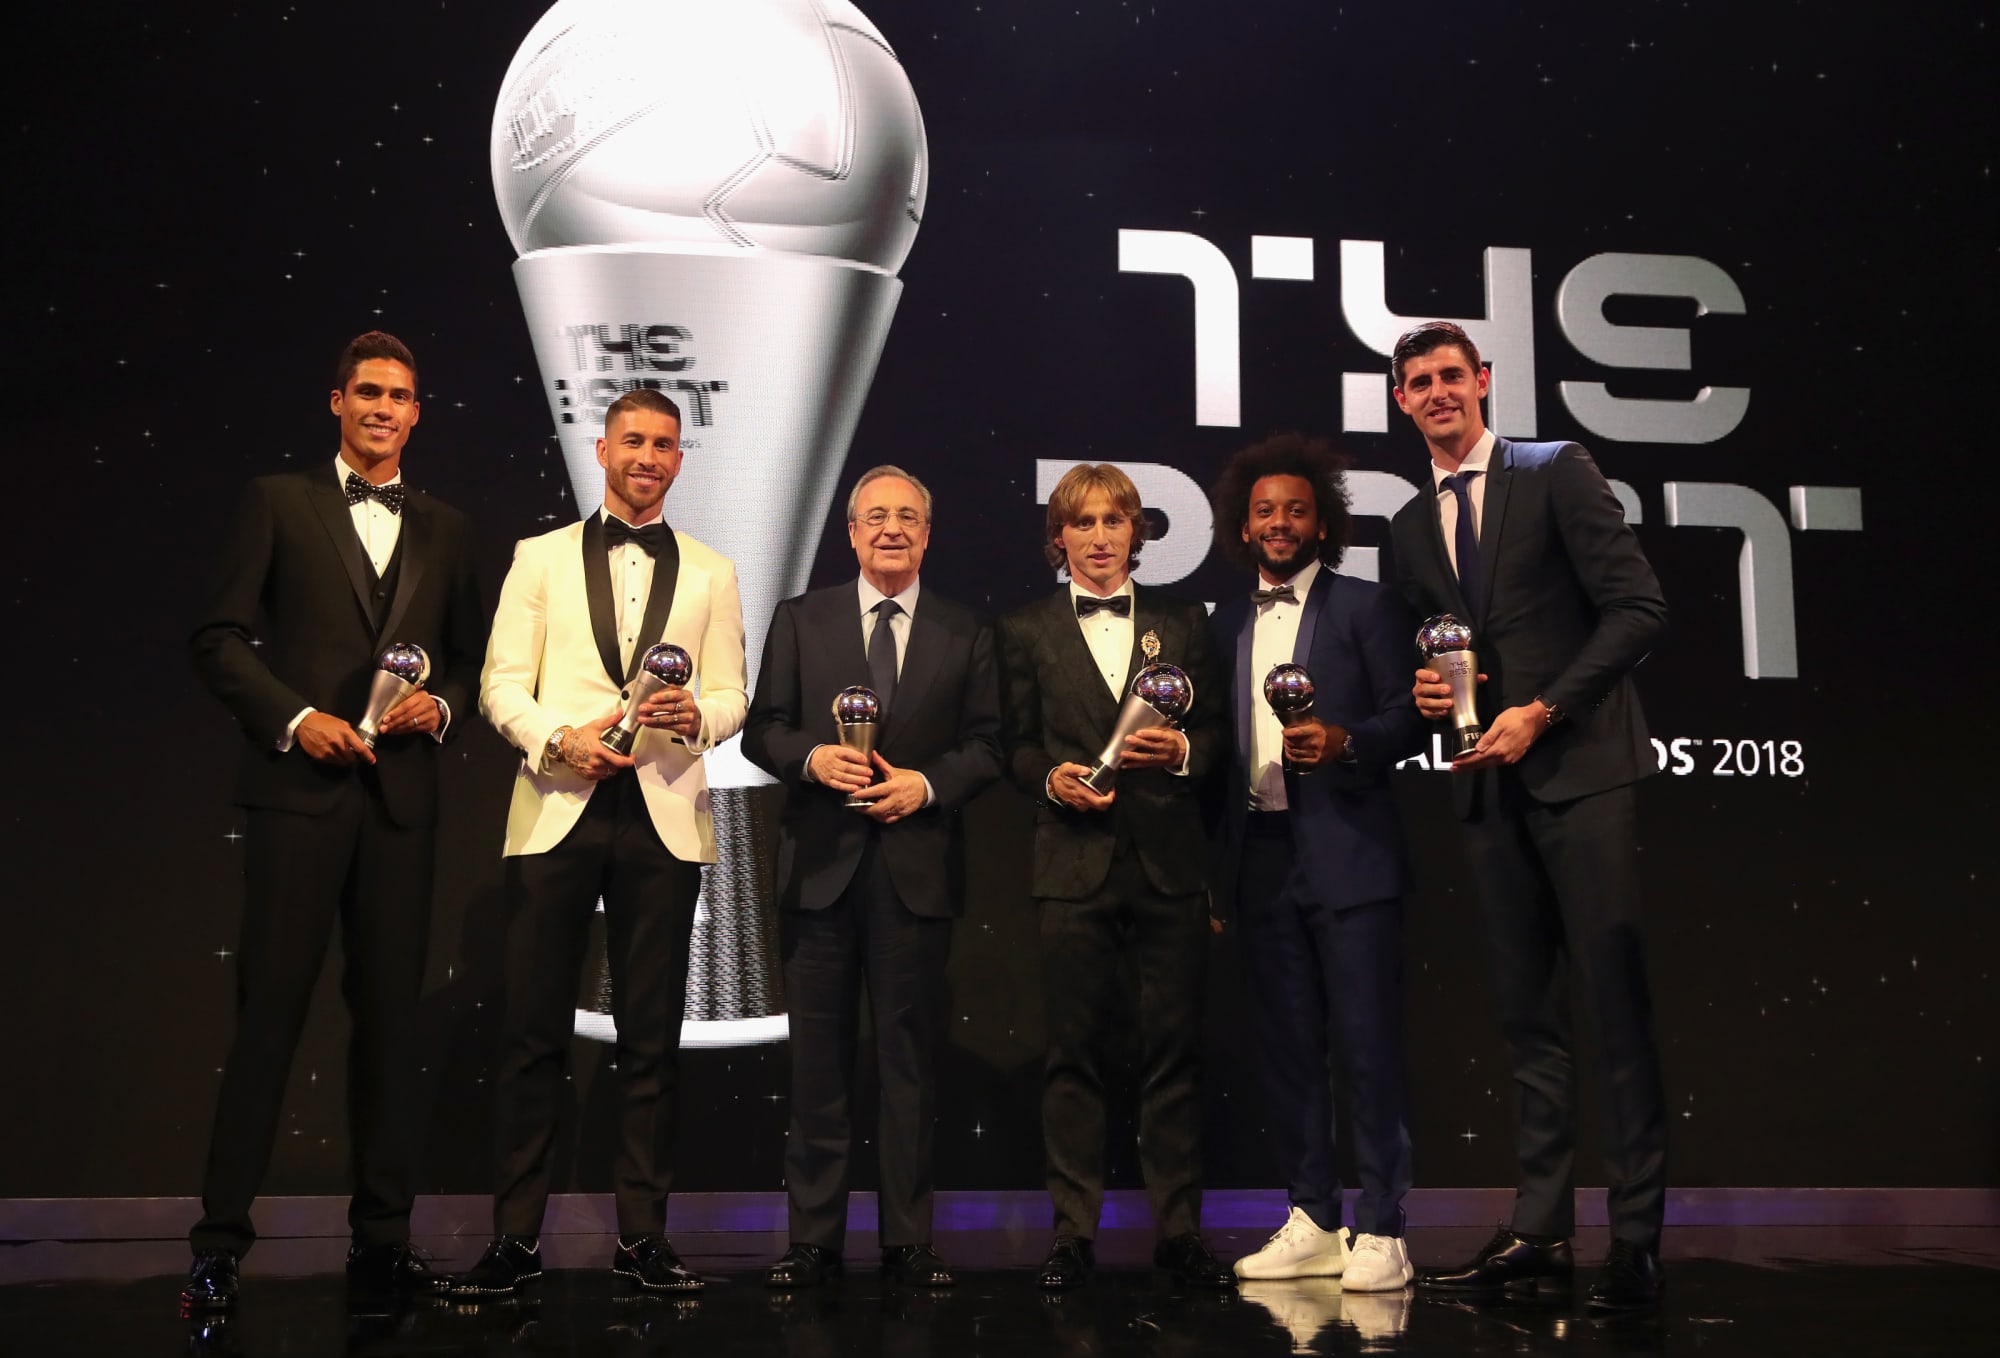 Real Madrid dominate at FIFA's award ceremony in London